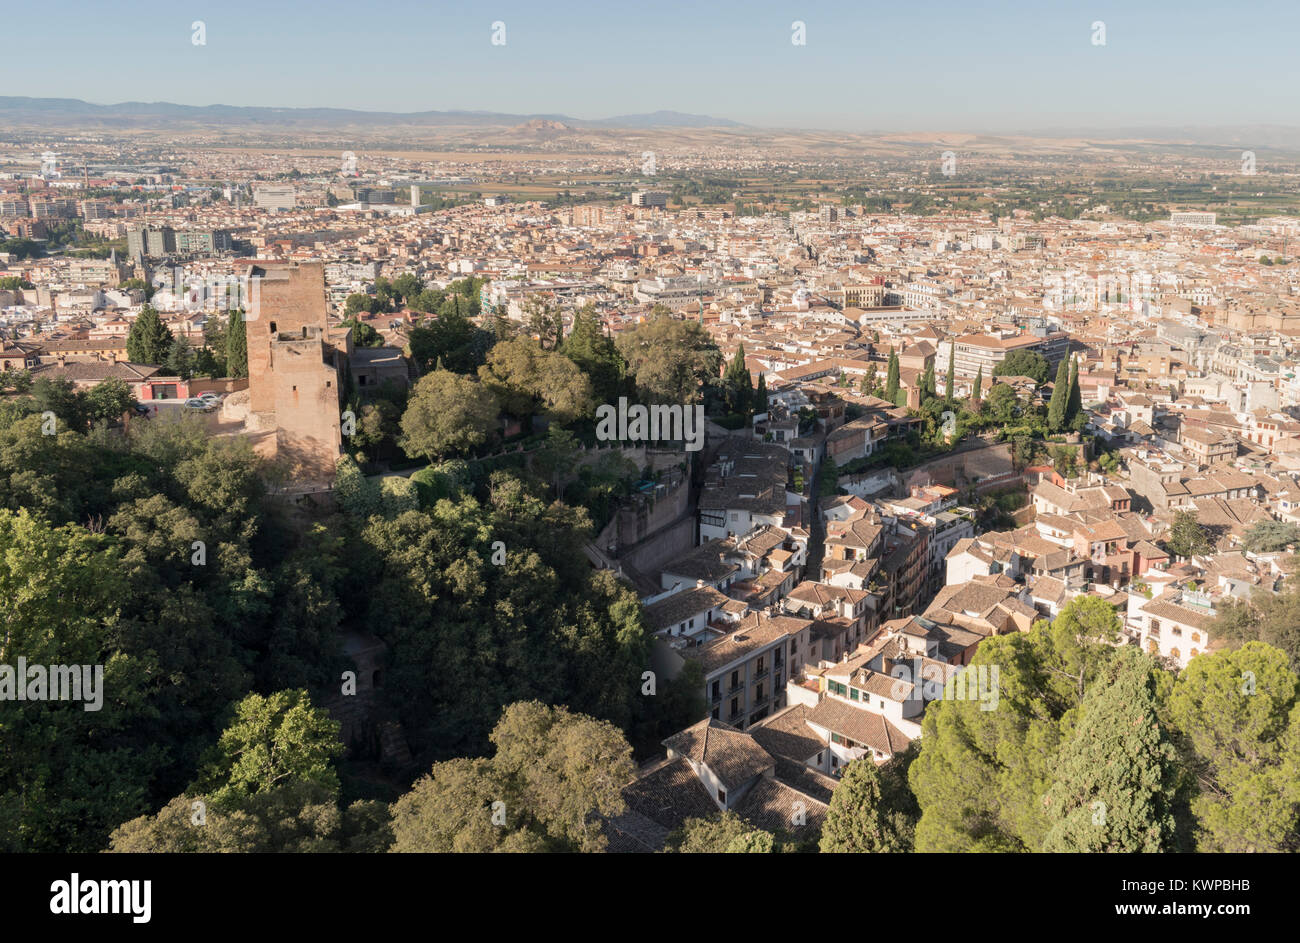 Views of the city of Granada from the Alhambra Palace on a bright sunny day. Stock Photo